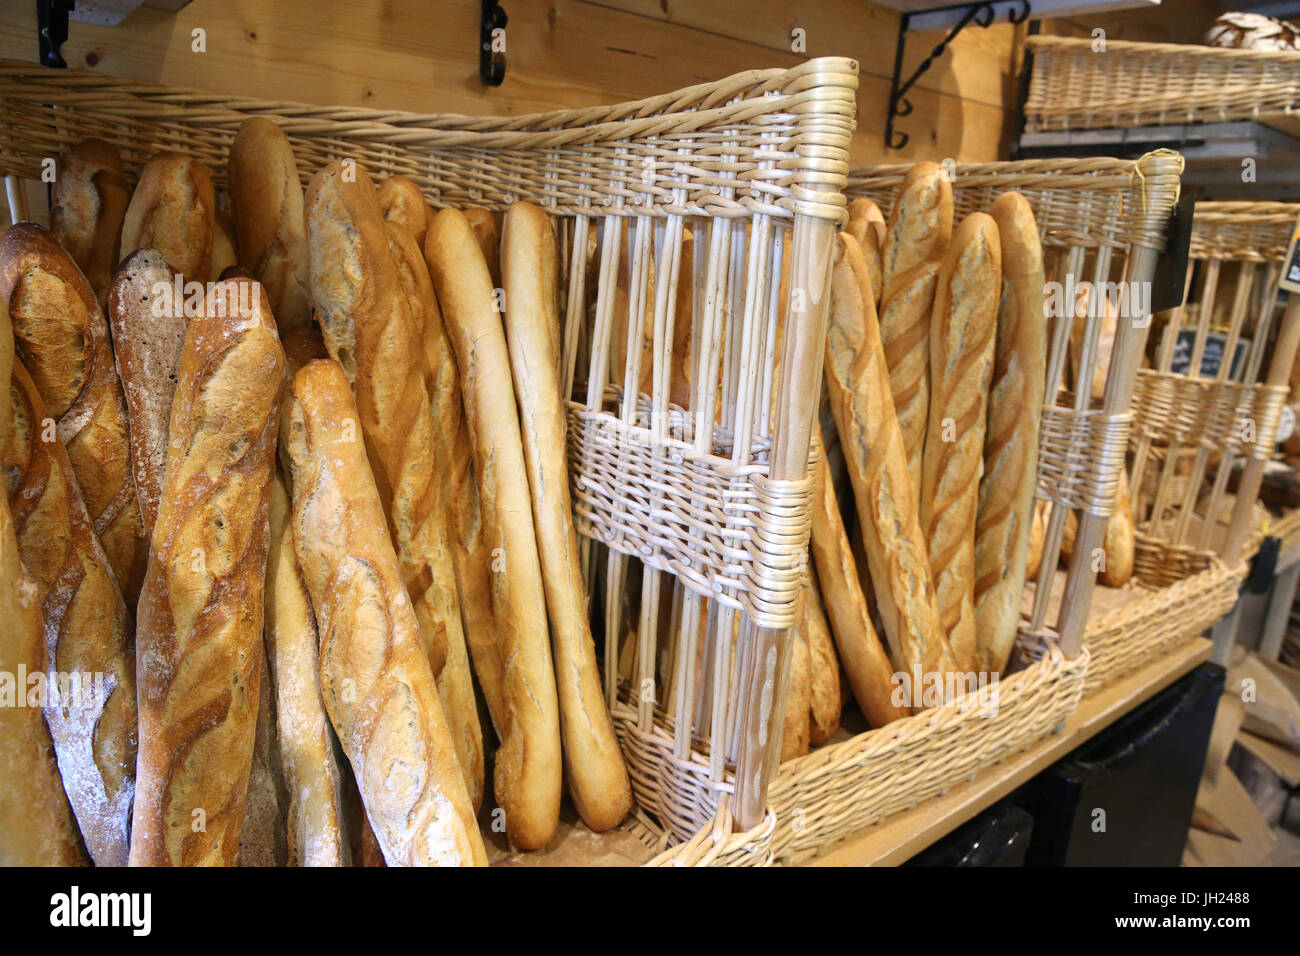 Bakery. French baguettes.  France. Stock Photo